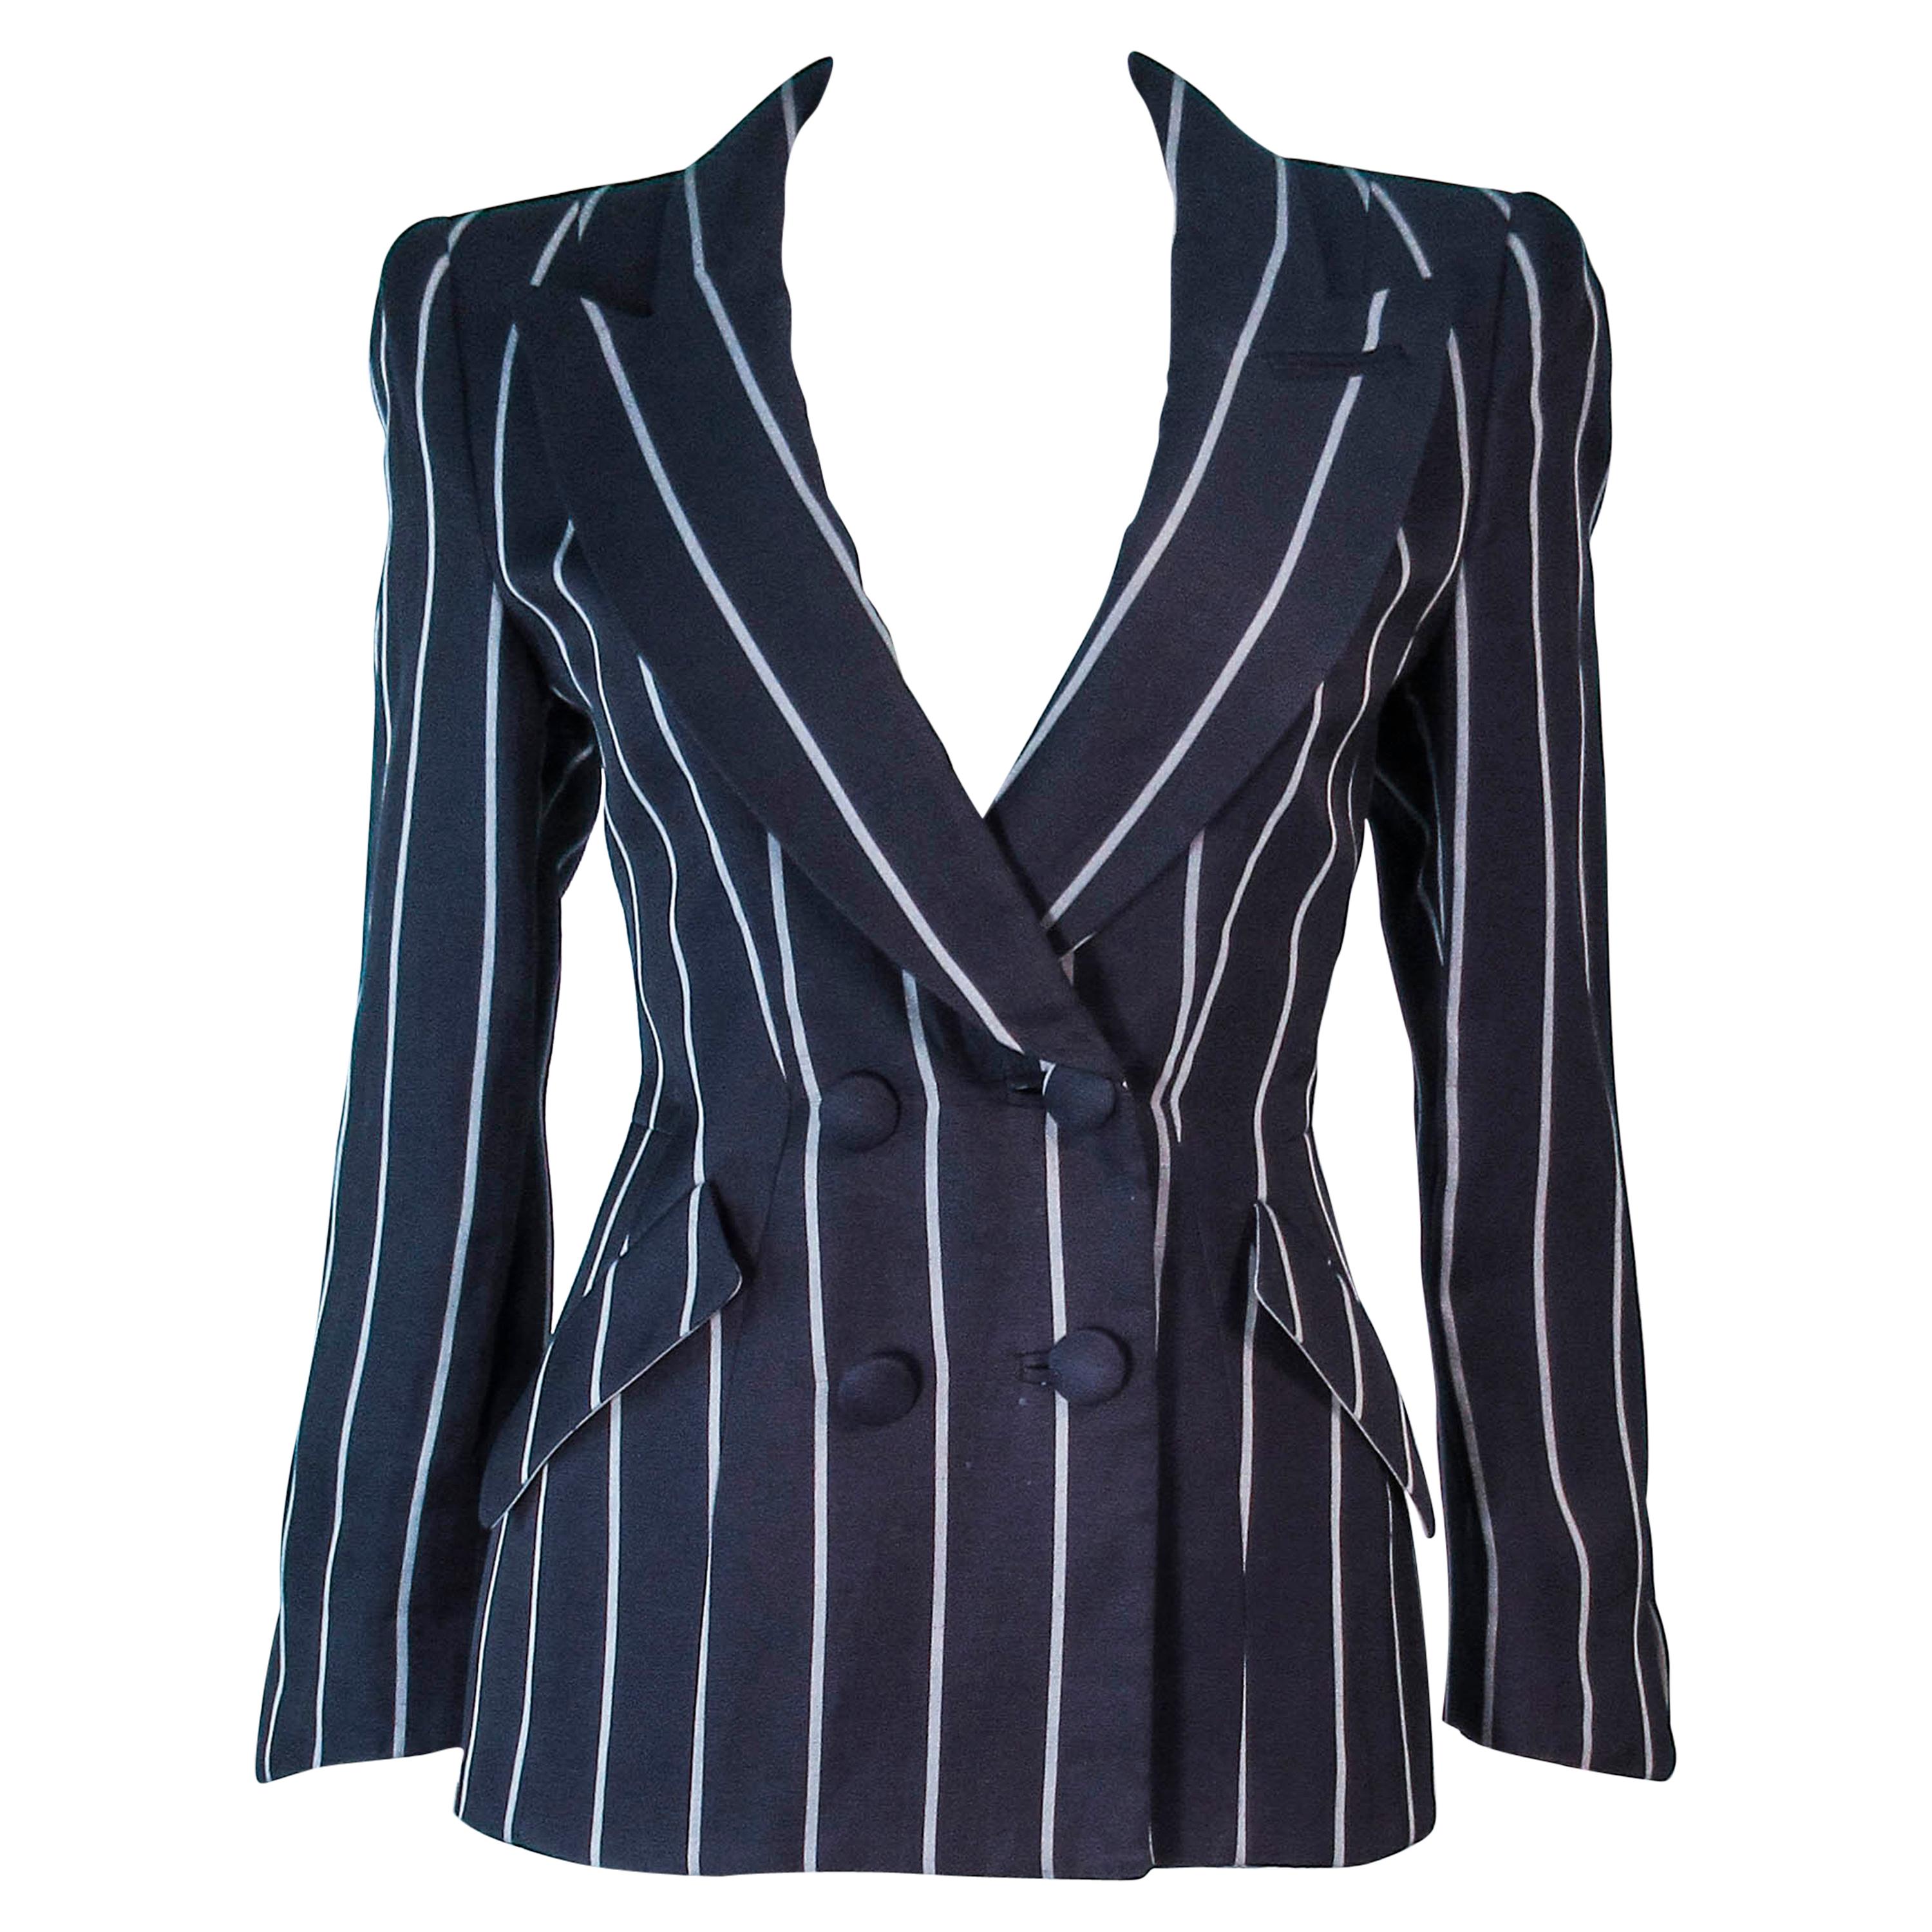 GIORGIO ARMANI Navy Striped Double Breasted Tailored Jacket Size 38